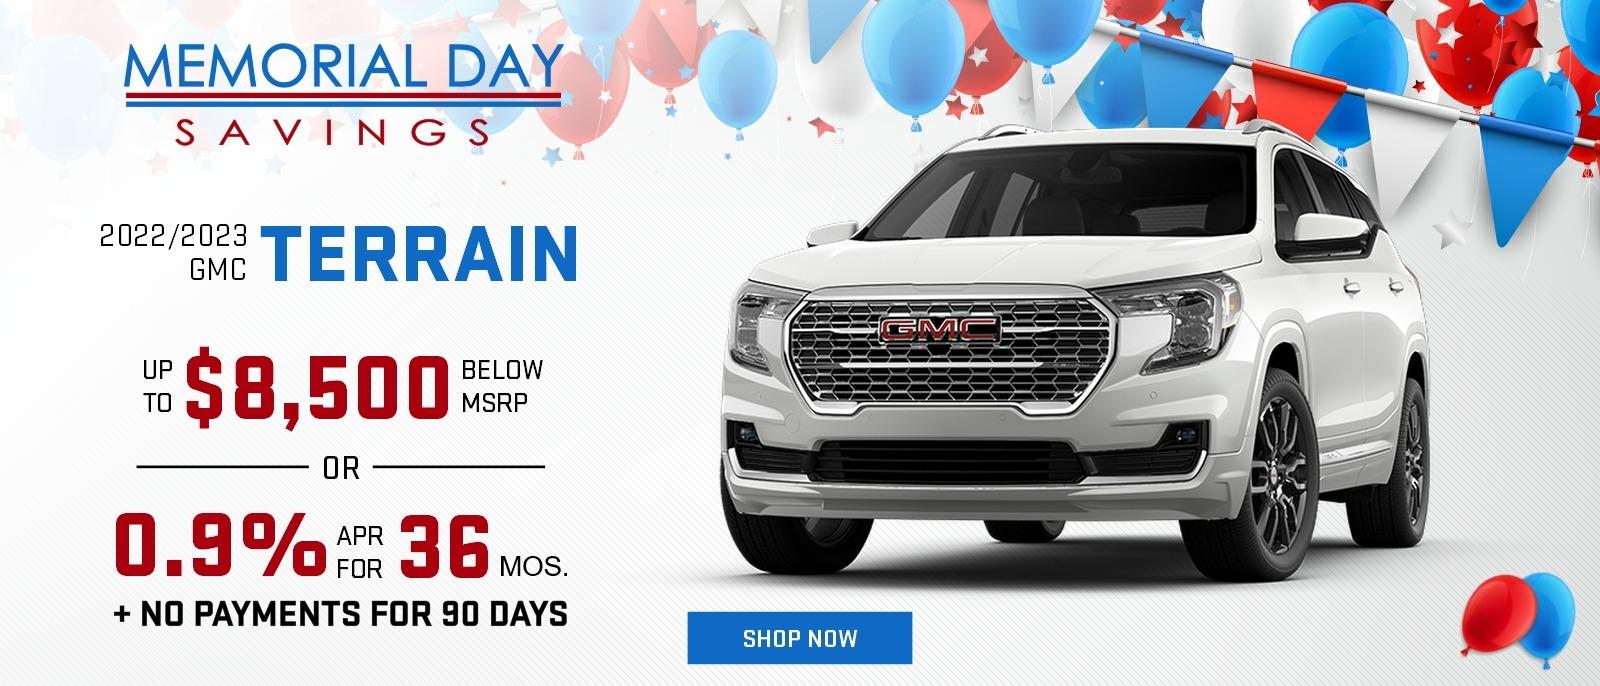 Memorial Day Savings
2022/2023 GMC Terrain
up to $8,500 below MSRP
or
0.9% APR for 36 months + NO PAYMENT FOR 90 DAYS
Shop Now